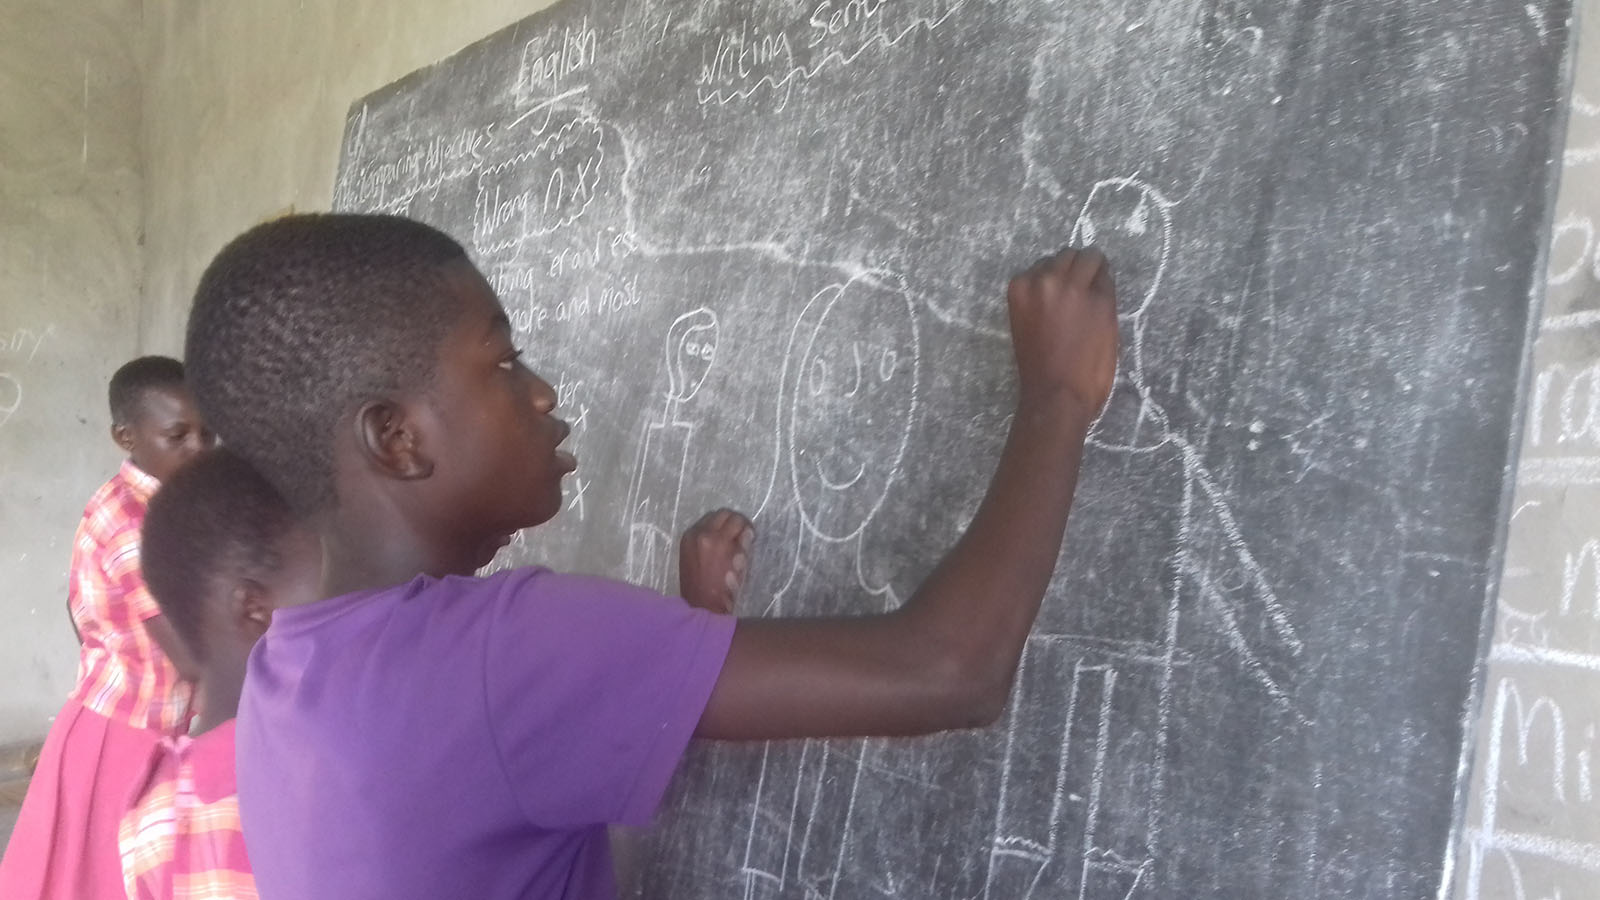 A child drawing with chalk on a blackboard